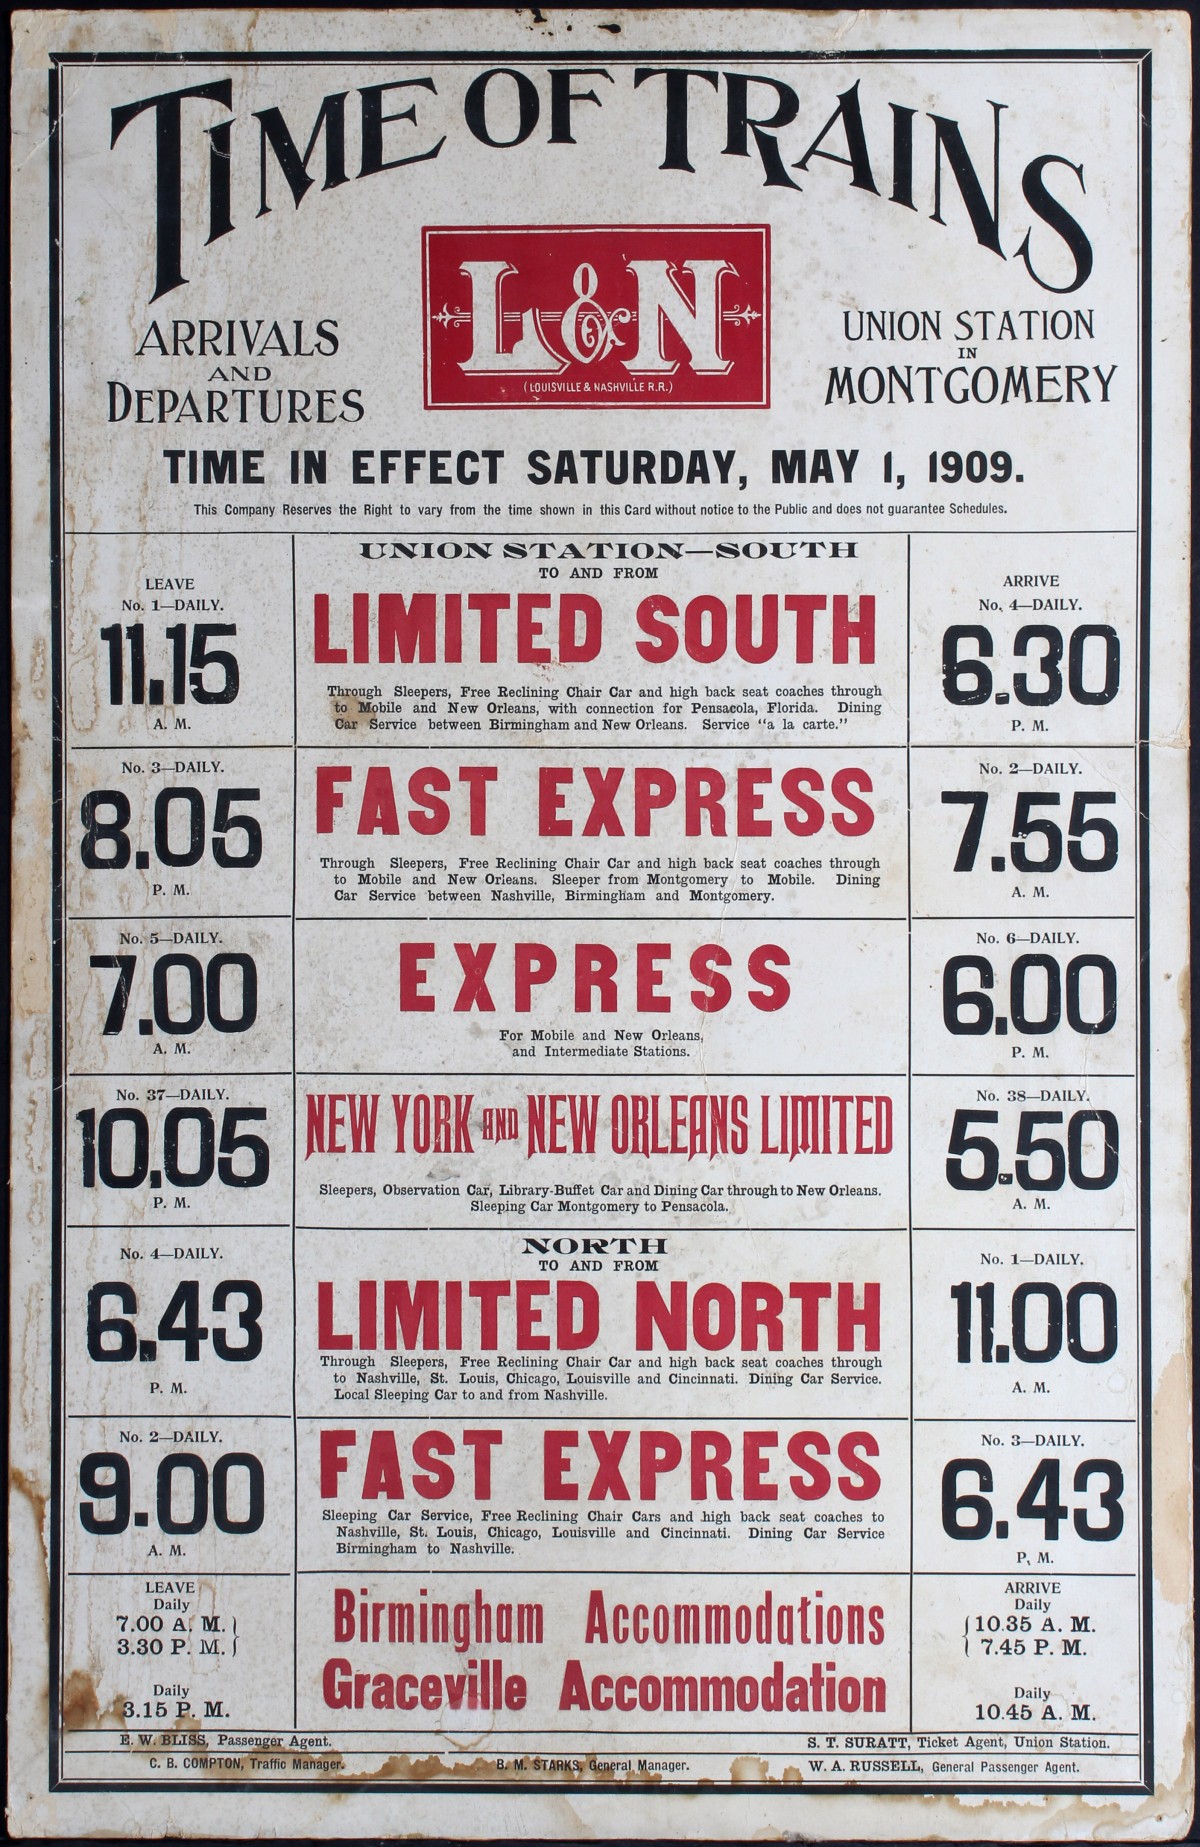 LOUISVILLE & NASHVILLE RAILROAD SIGN AND TIMETABLE